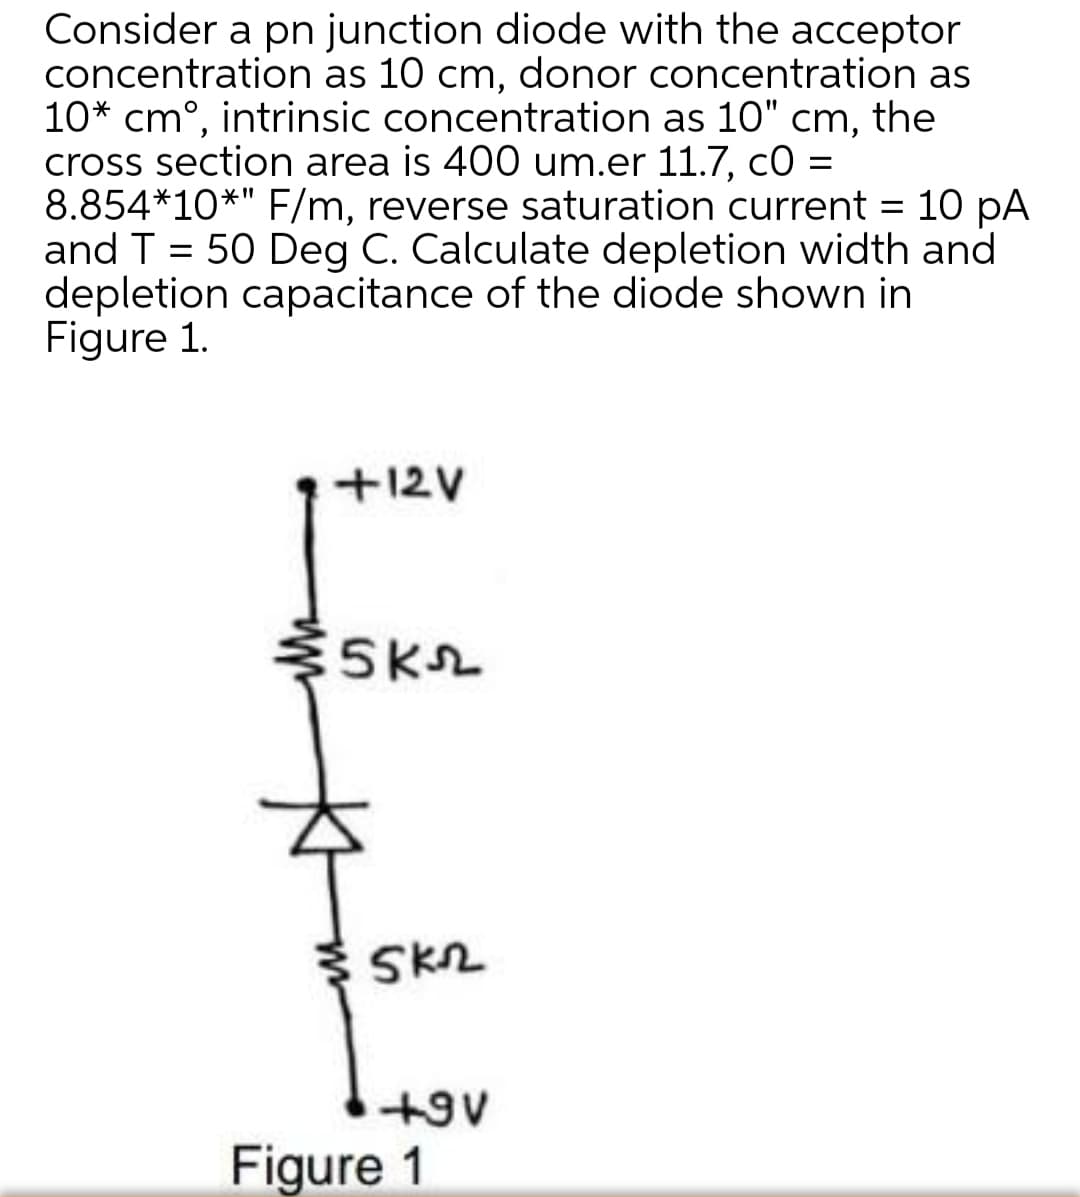 Consider a pn junction diode with the acceptor
concentration as 10 cm, donor concentration as
10* cm°, intrinsic concentration as 10" cm, the
cross section area is 400 um.er 11.7, co =
8.854*10*" F/m, reverse saturation current = 10 pA
and T = 50 Deg C. Calculate depletion width and
depletion capacitance of the diode shown in
Figure 1.
%3D
+12V
SK2
+9V
Figure 1
